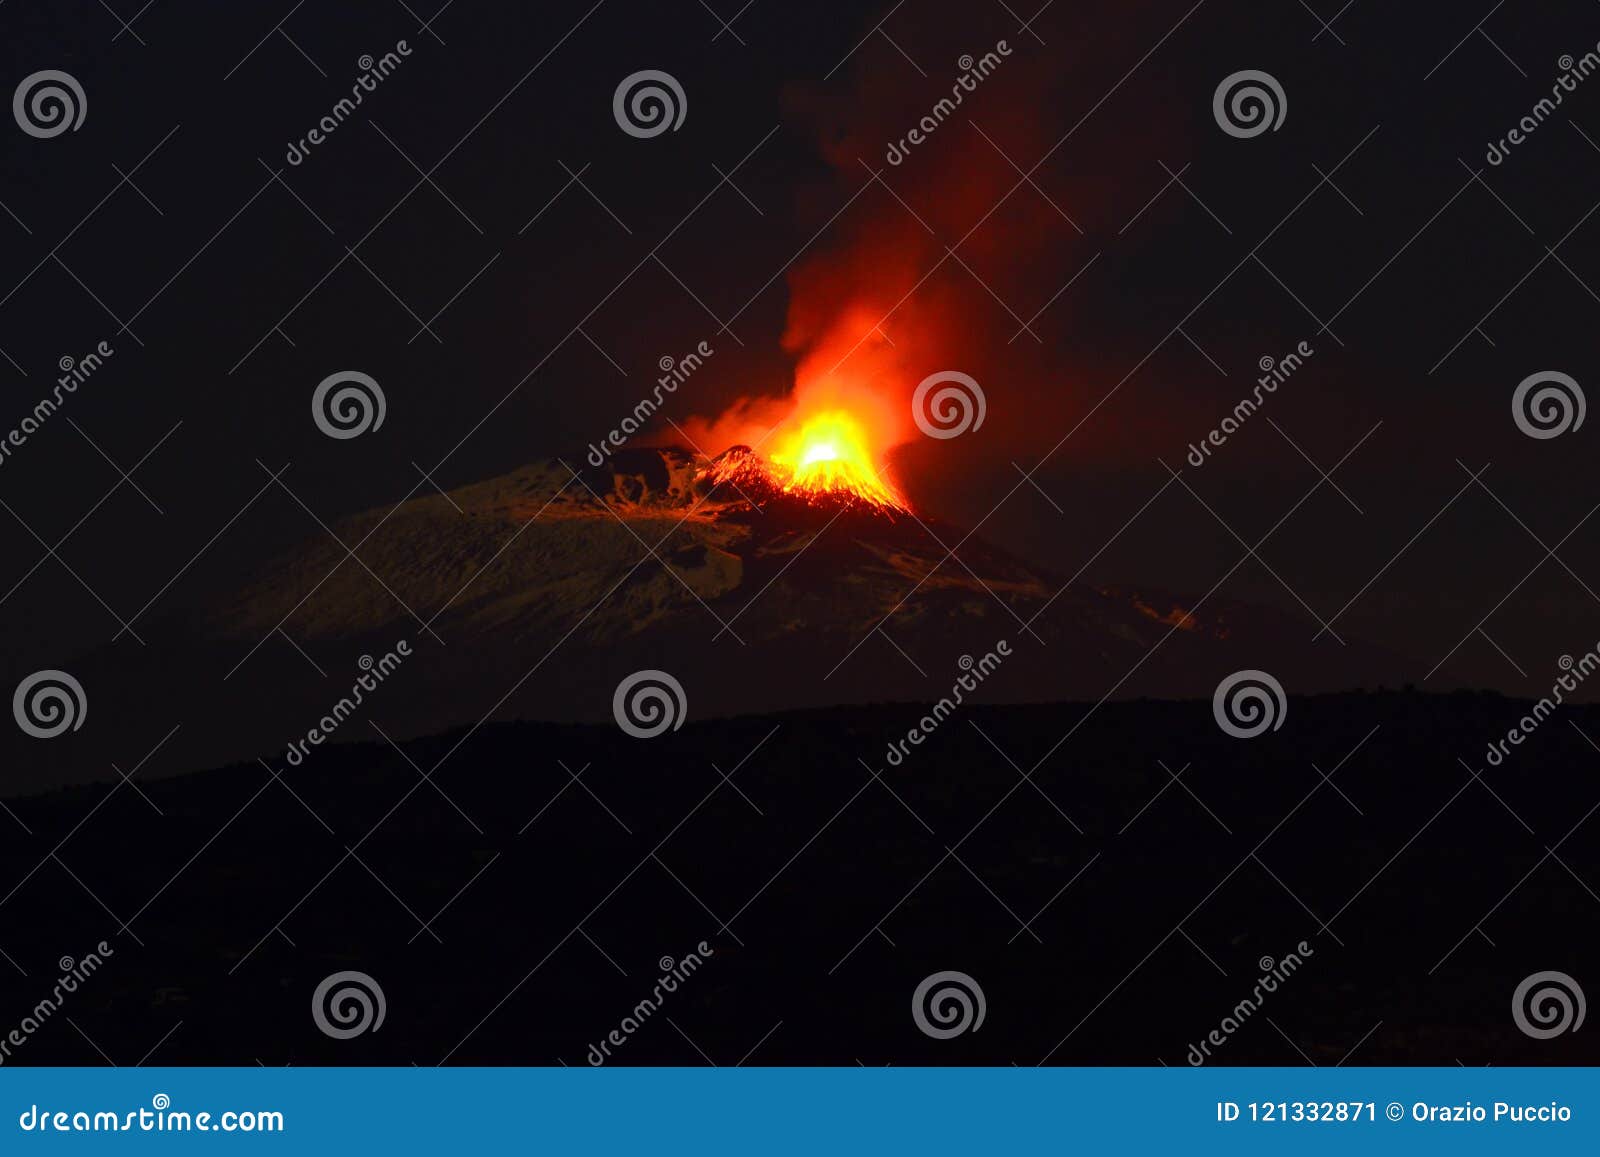 volcano eruption in the evening seen from afar etna eruption from the crater laterala view at night with a grade glow of fiery lav